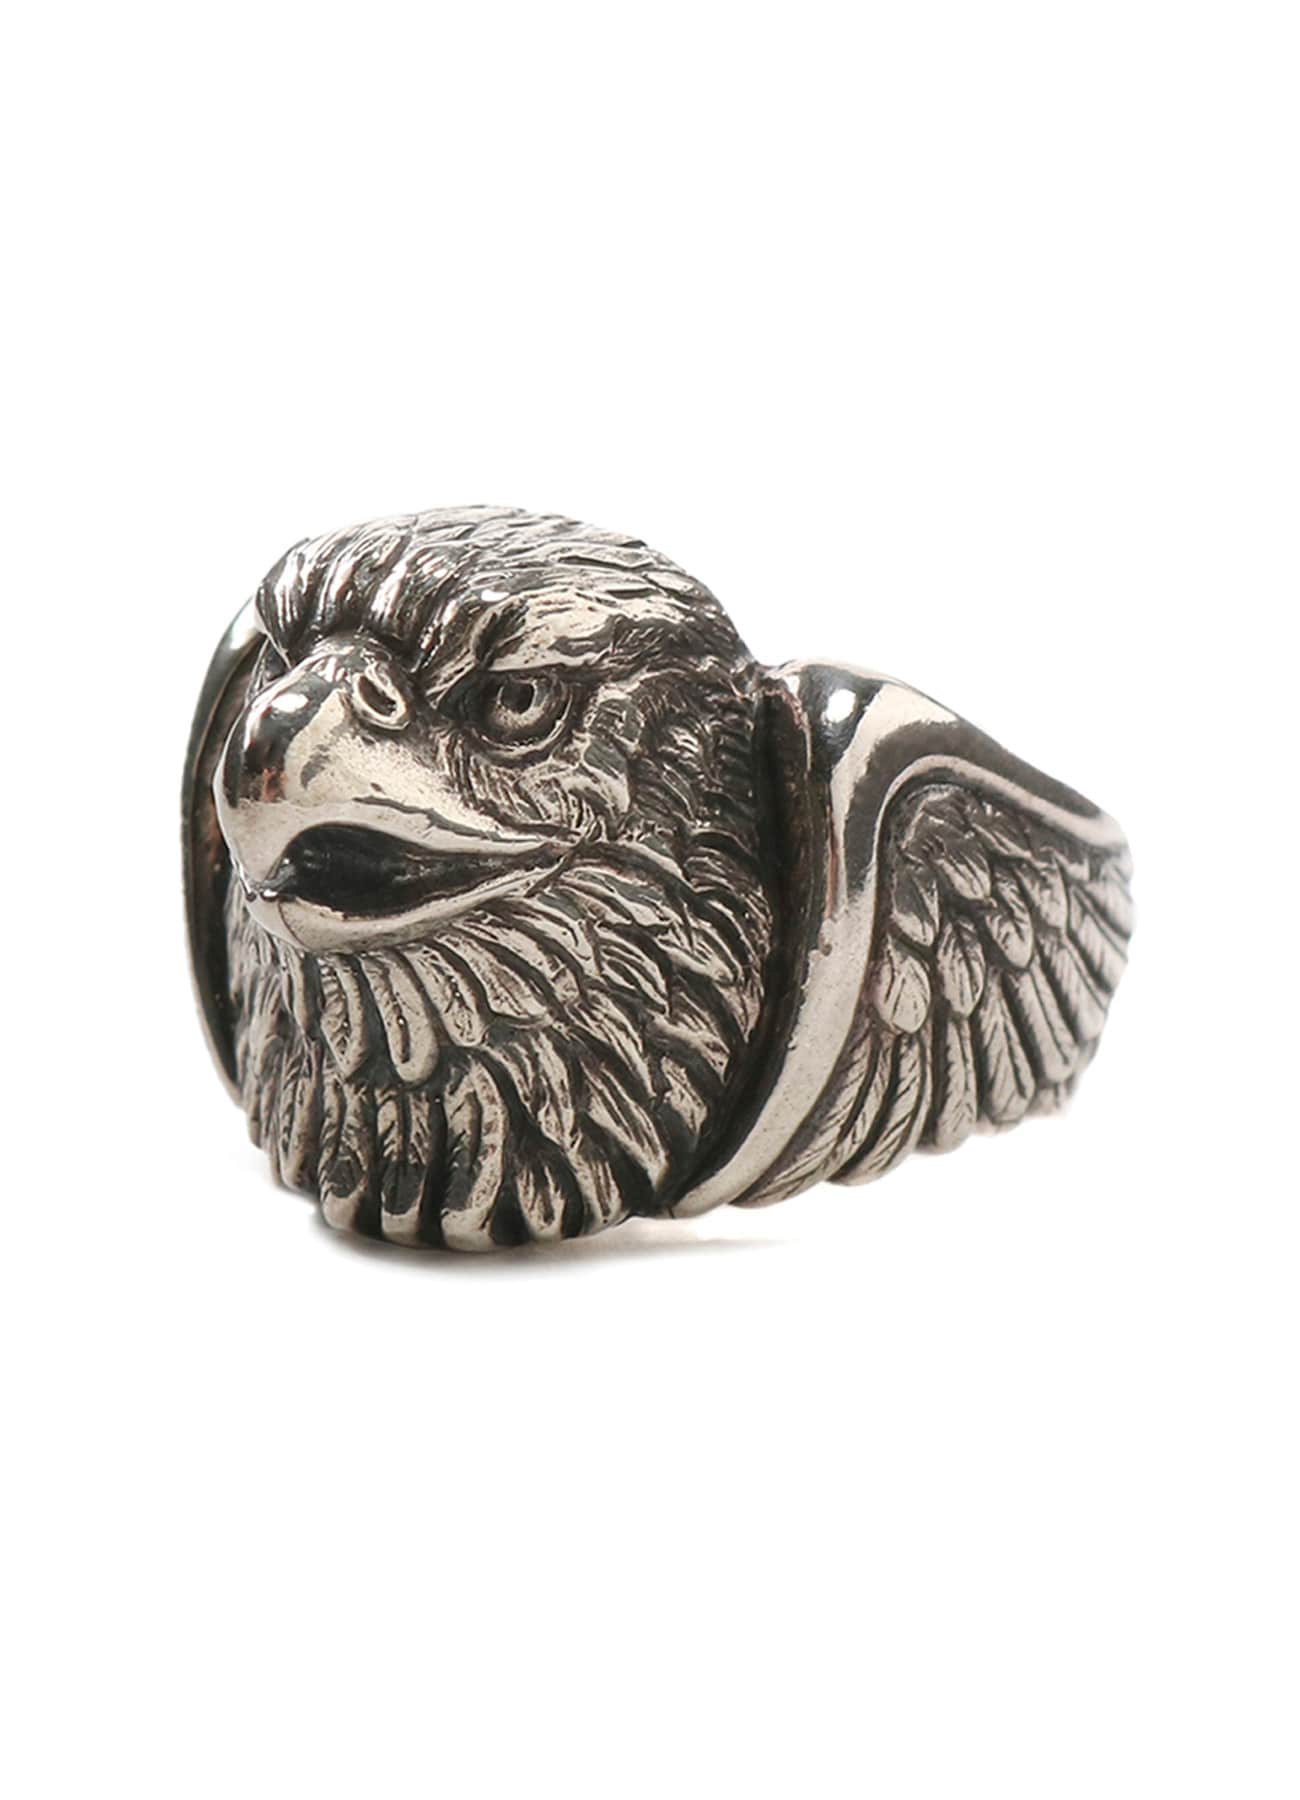 SILVER 950 EAGLE RING